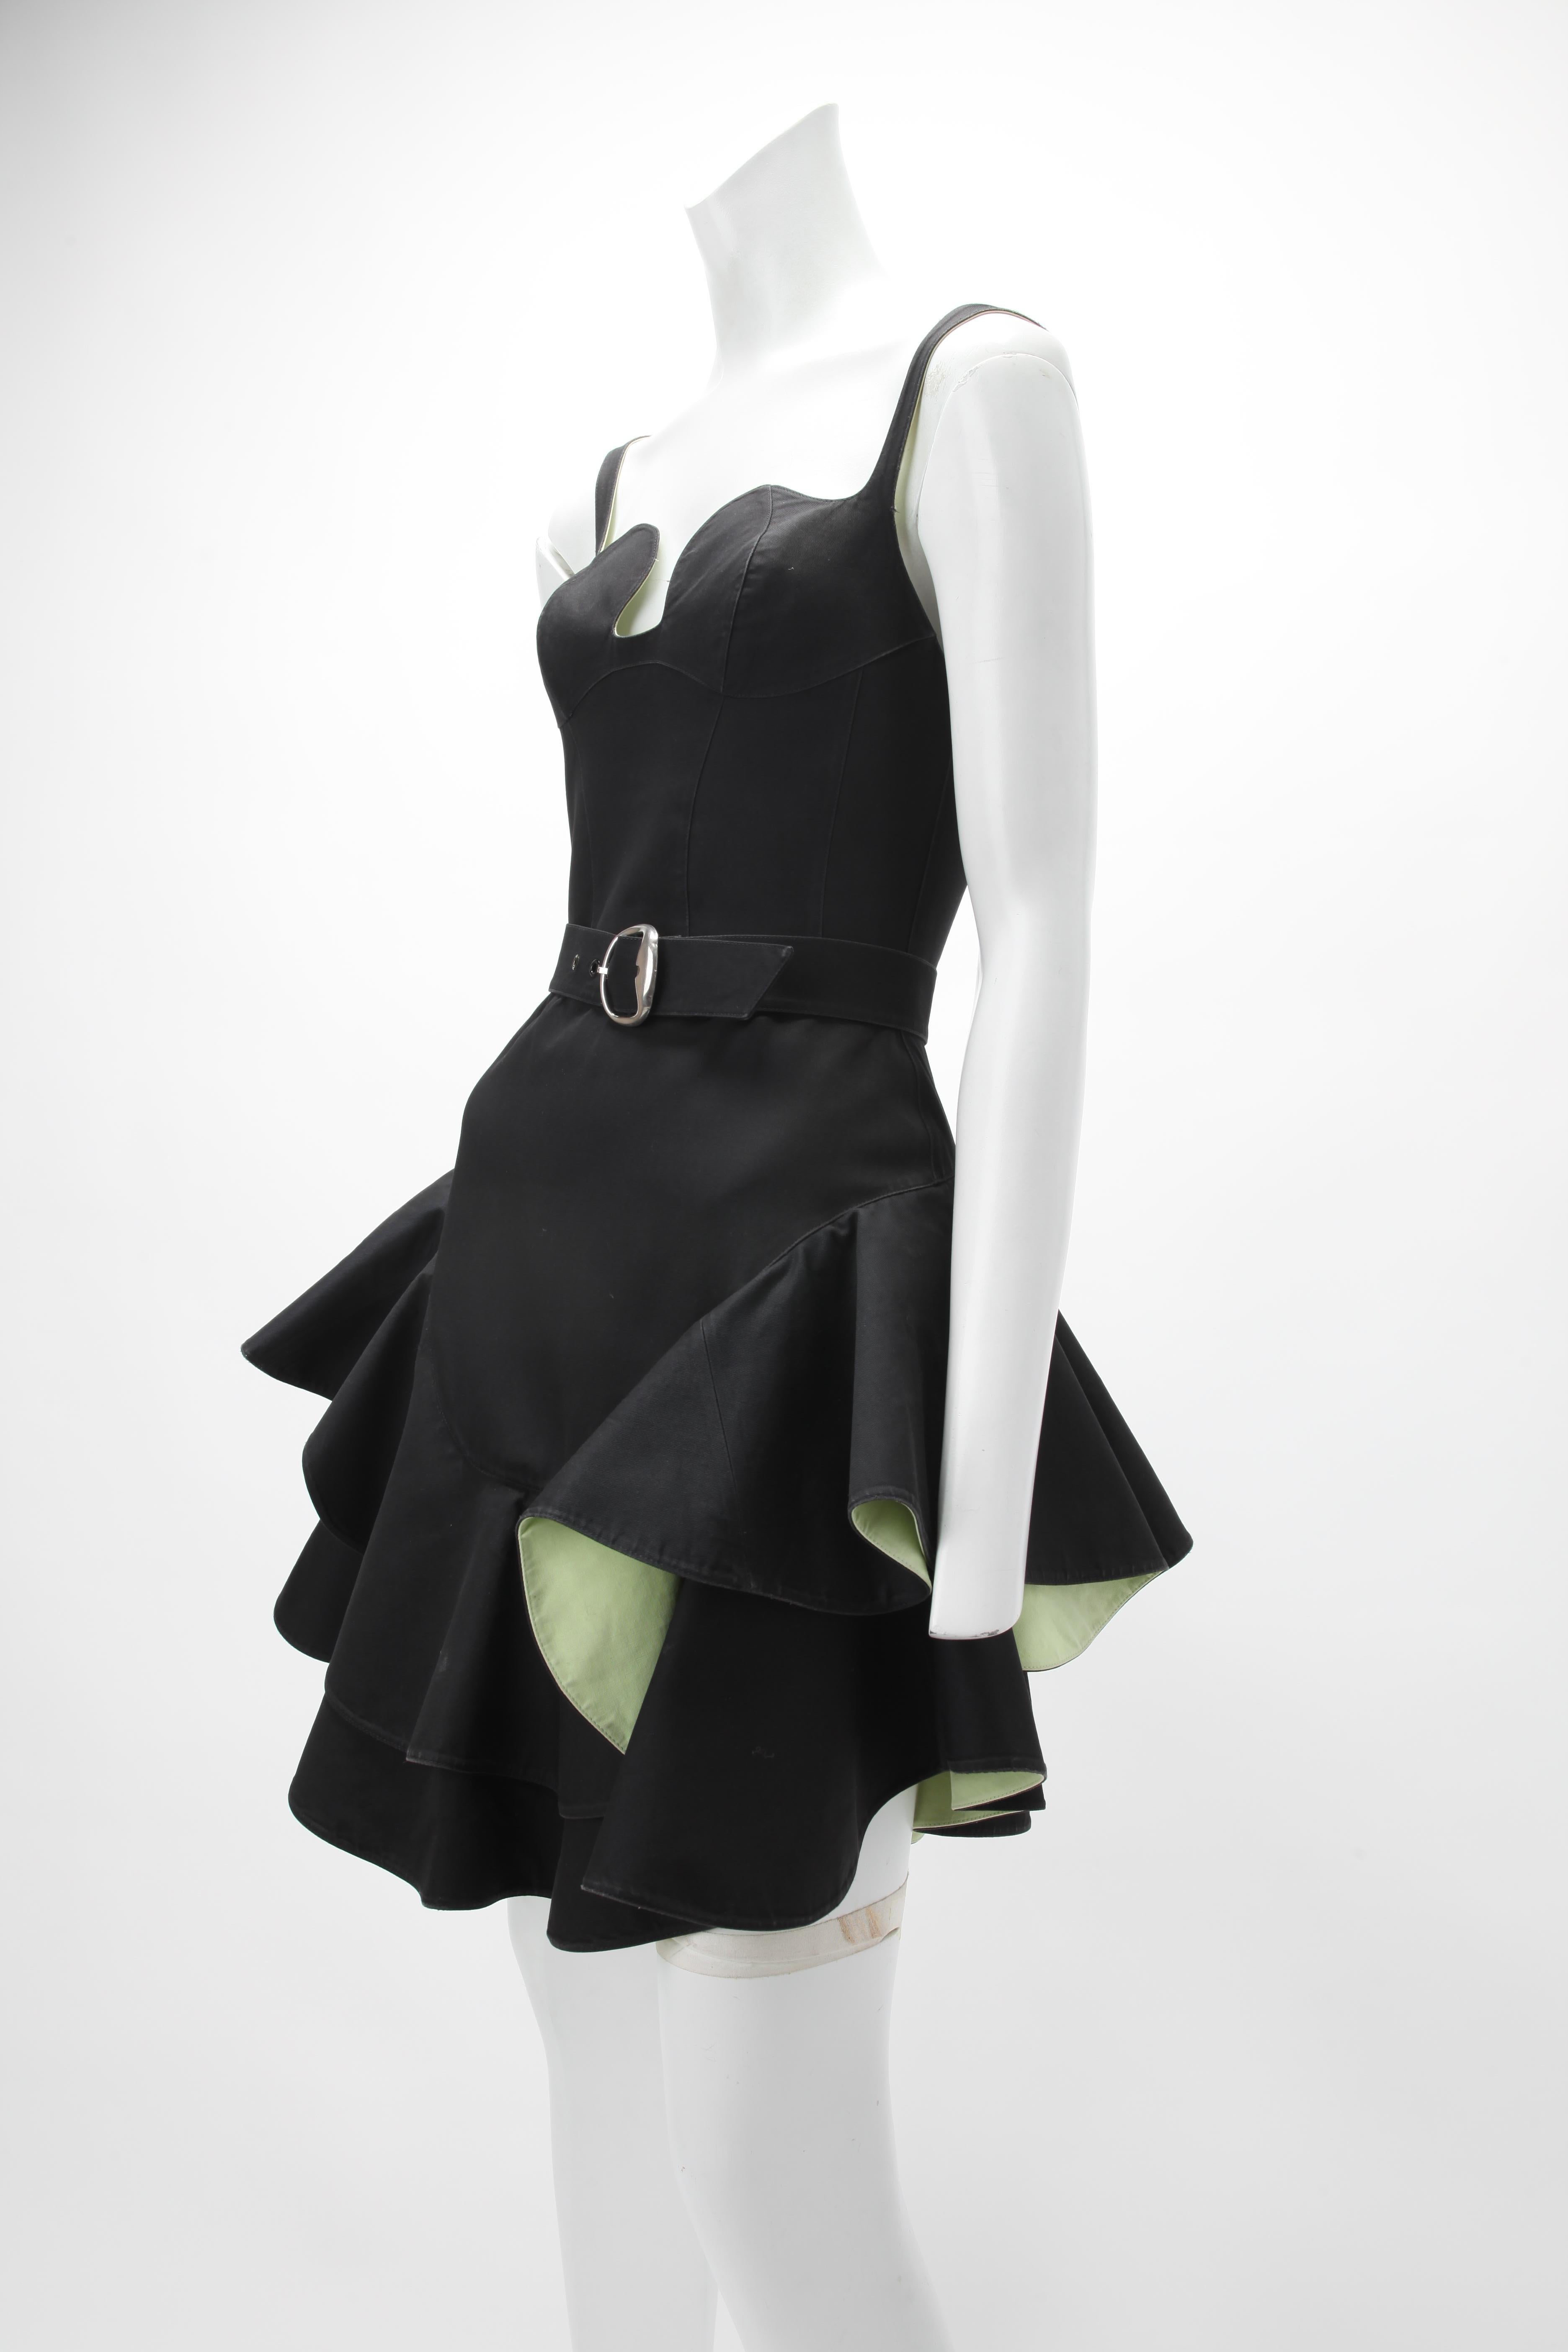 S/S 1990 Thierry Mugler Black Cotton Dress with Layered, Tiered Skirt Panels Backed with Acid Green Cotton; Fitted Bodice with Adjustable Straps; Self Belt with Silver-tone Buckle to Match Shoulder Straps. Size Small

